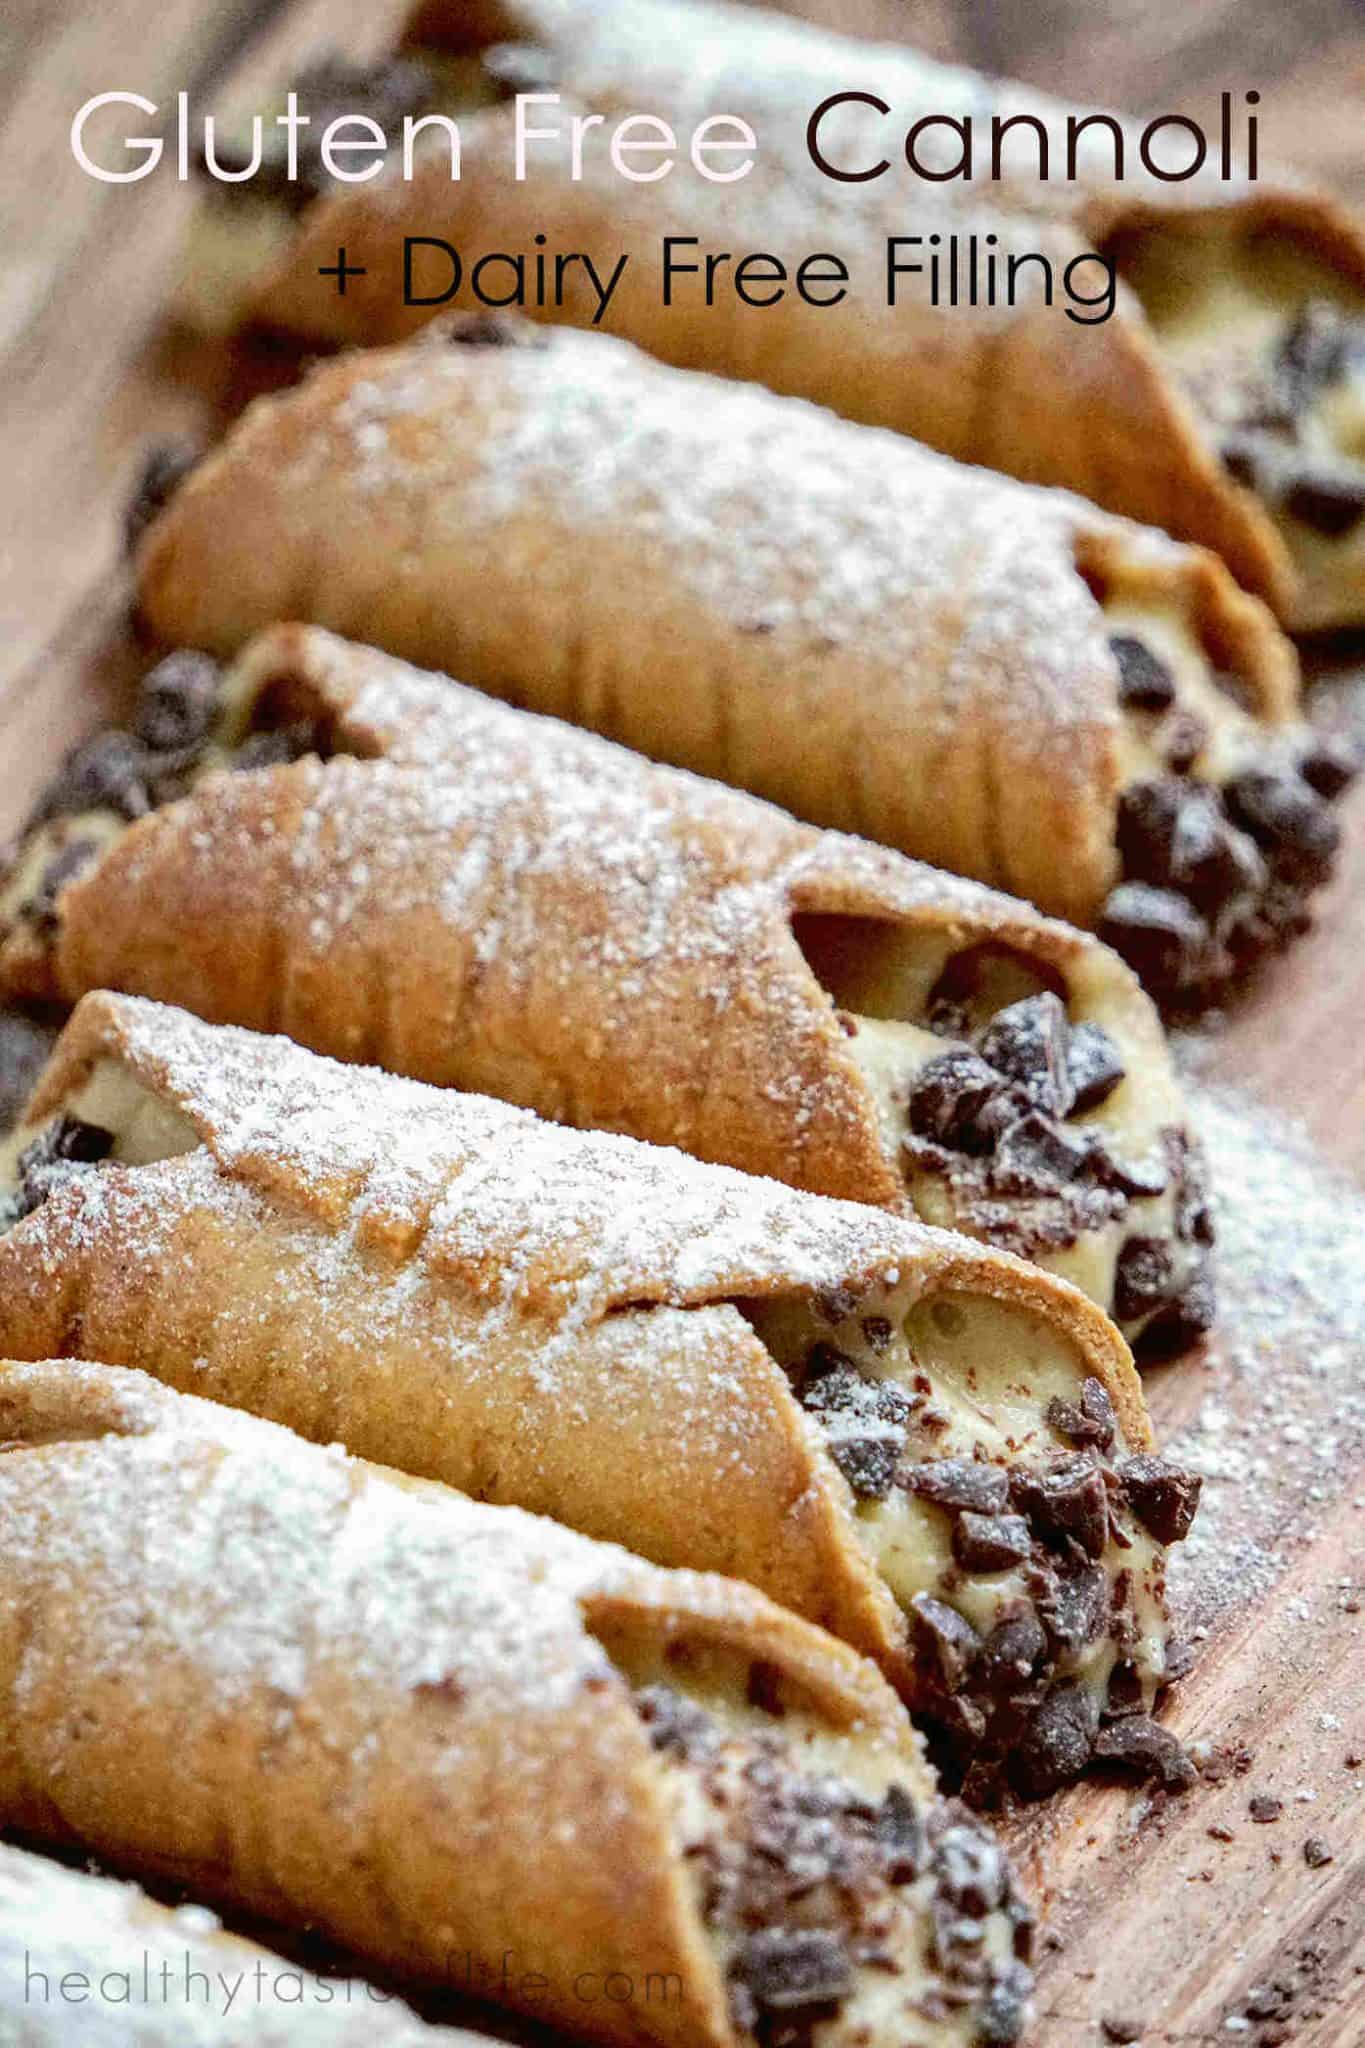 Gluten Free Cannoli Recipe + Dairy Free Filling | This healthy gluten free cannoli recipe will help you get into the holiday spirit.